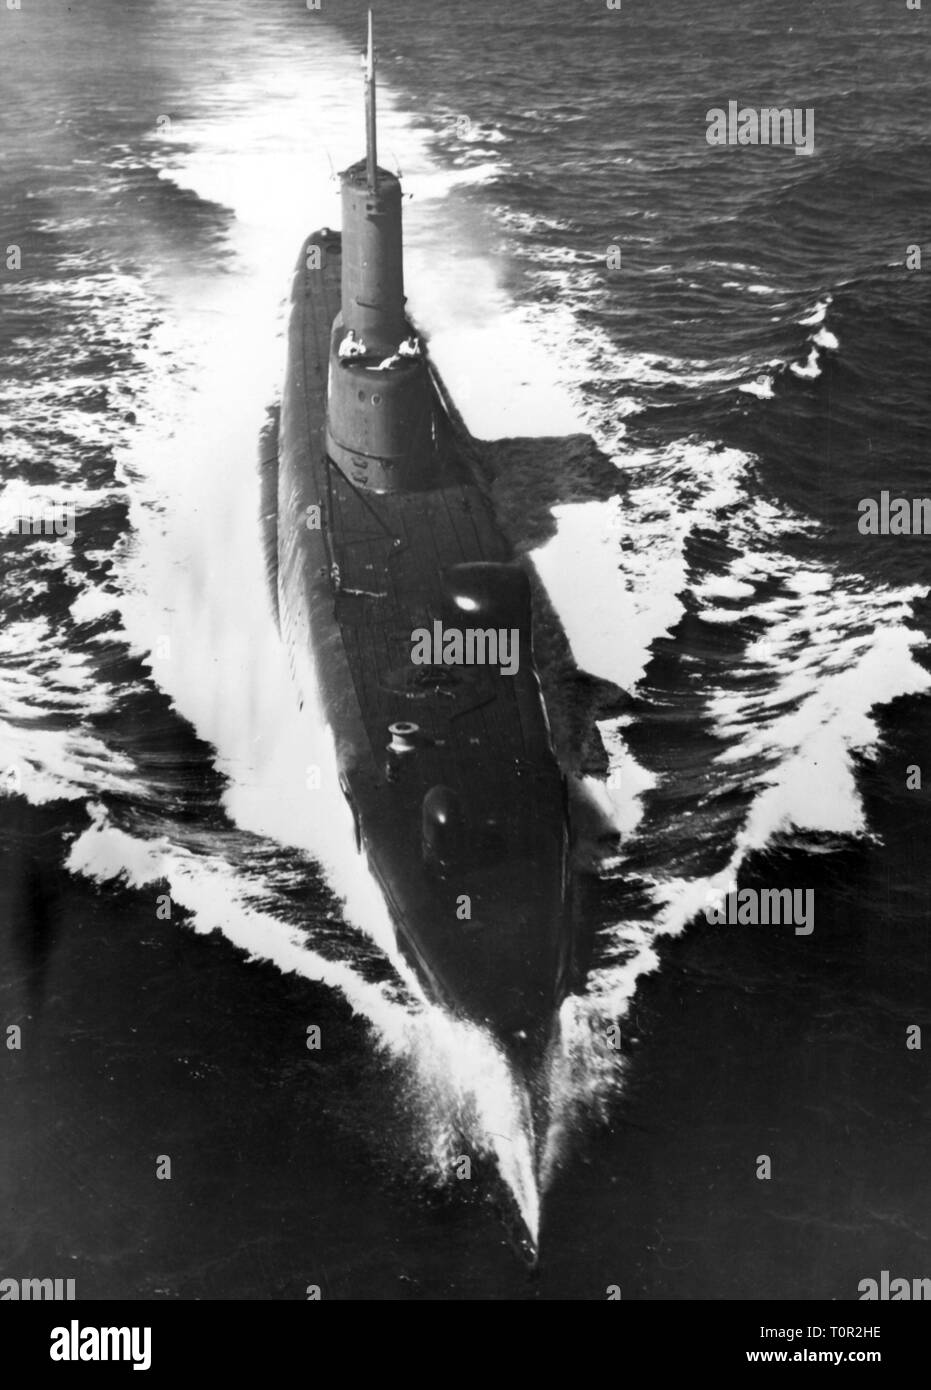 transport / transportation, navigation, warship, submarine, USA, USS Becuna (SS-319), service with the 6th Fleet in the Mediterranean Sea, on the alert, 12.11.1956, SS319, Balao-class, Balao class, US navy, US Navy, naval forces, military, NATO, sea, seas, alarm, alarms, crisis, crises, Hungary, 1950s, 50s, 20th century, people, transport, transportation, warship, warships, submarine, submarine boat, U-boat, submarines, submarine boats, U-boats, USA, United States of America, service, services, fleet, fleets, on the alert, red alert, historic, hi, Additional-Rights-Clearance-Info-Not-Available Stock Photo